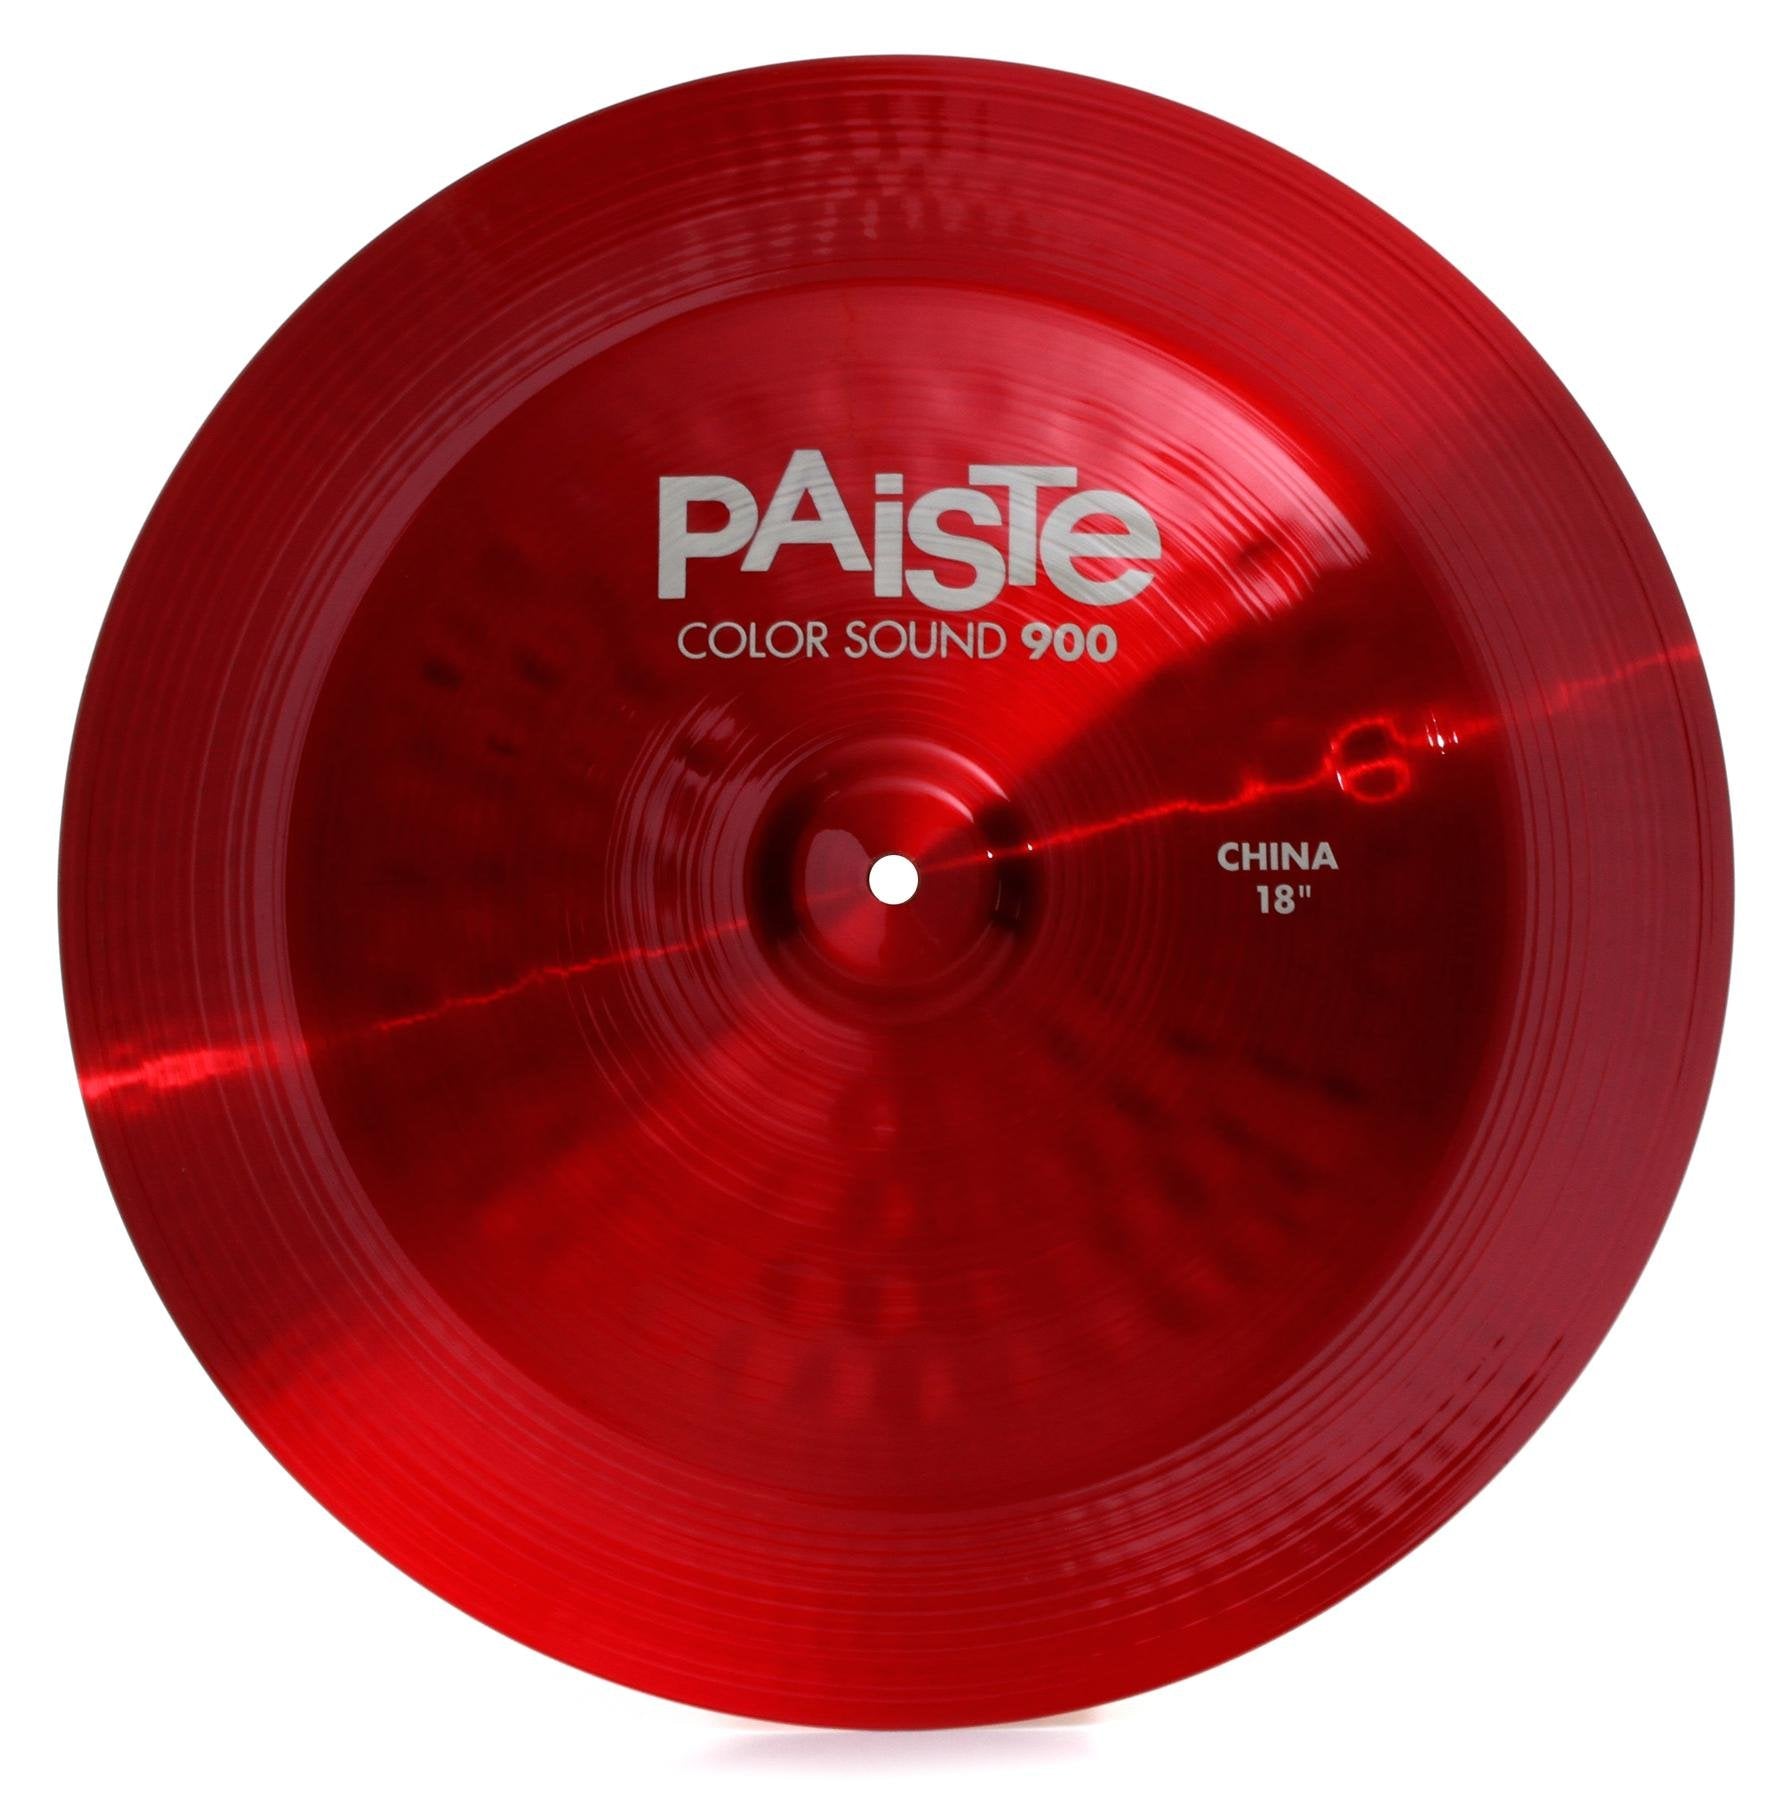 PAISTE  Color Sound 900 18" China Cymbal (Available in 2 colors)